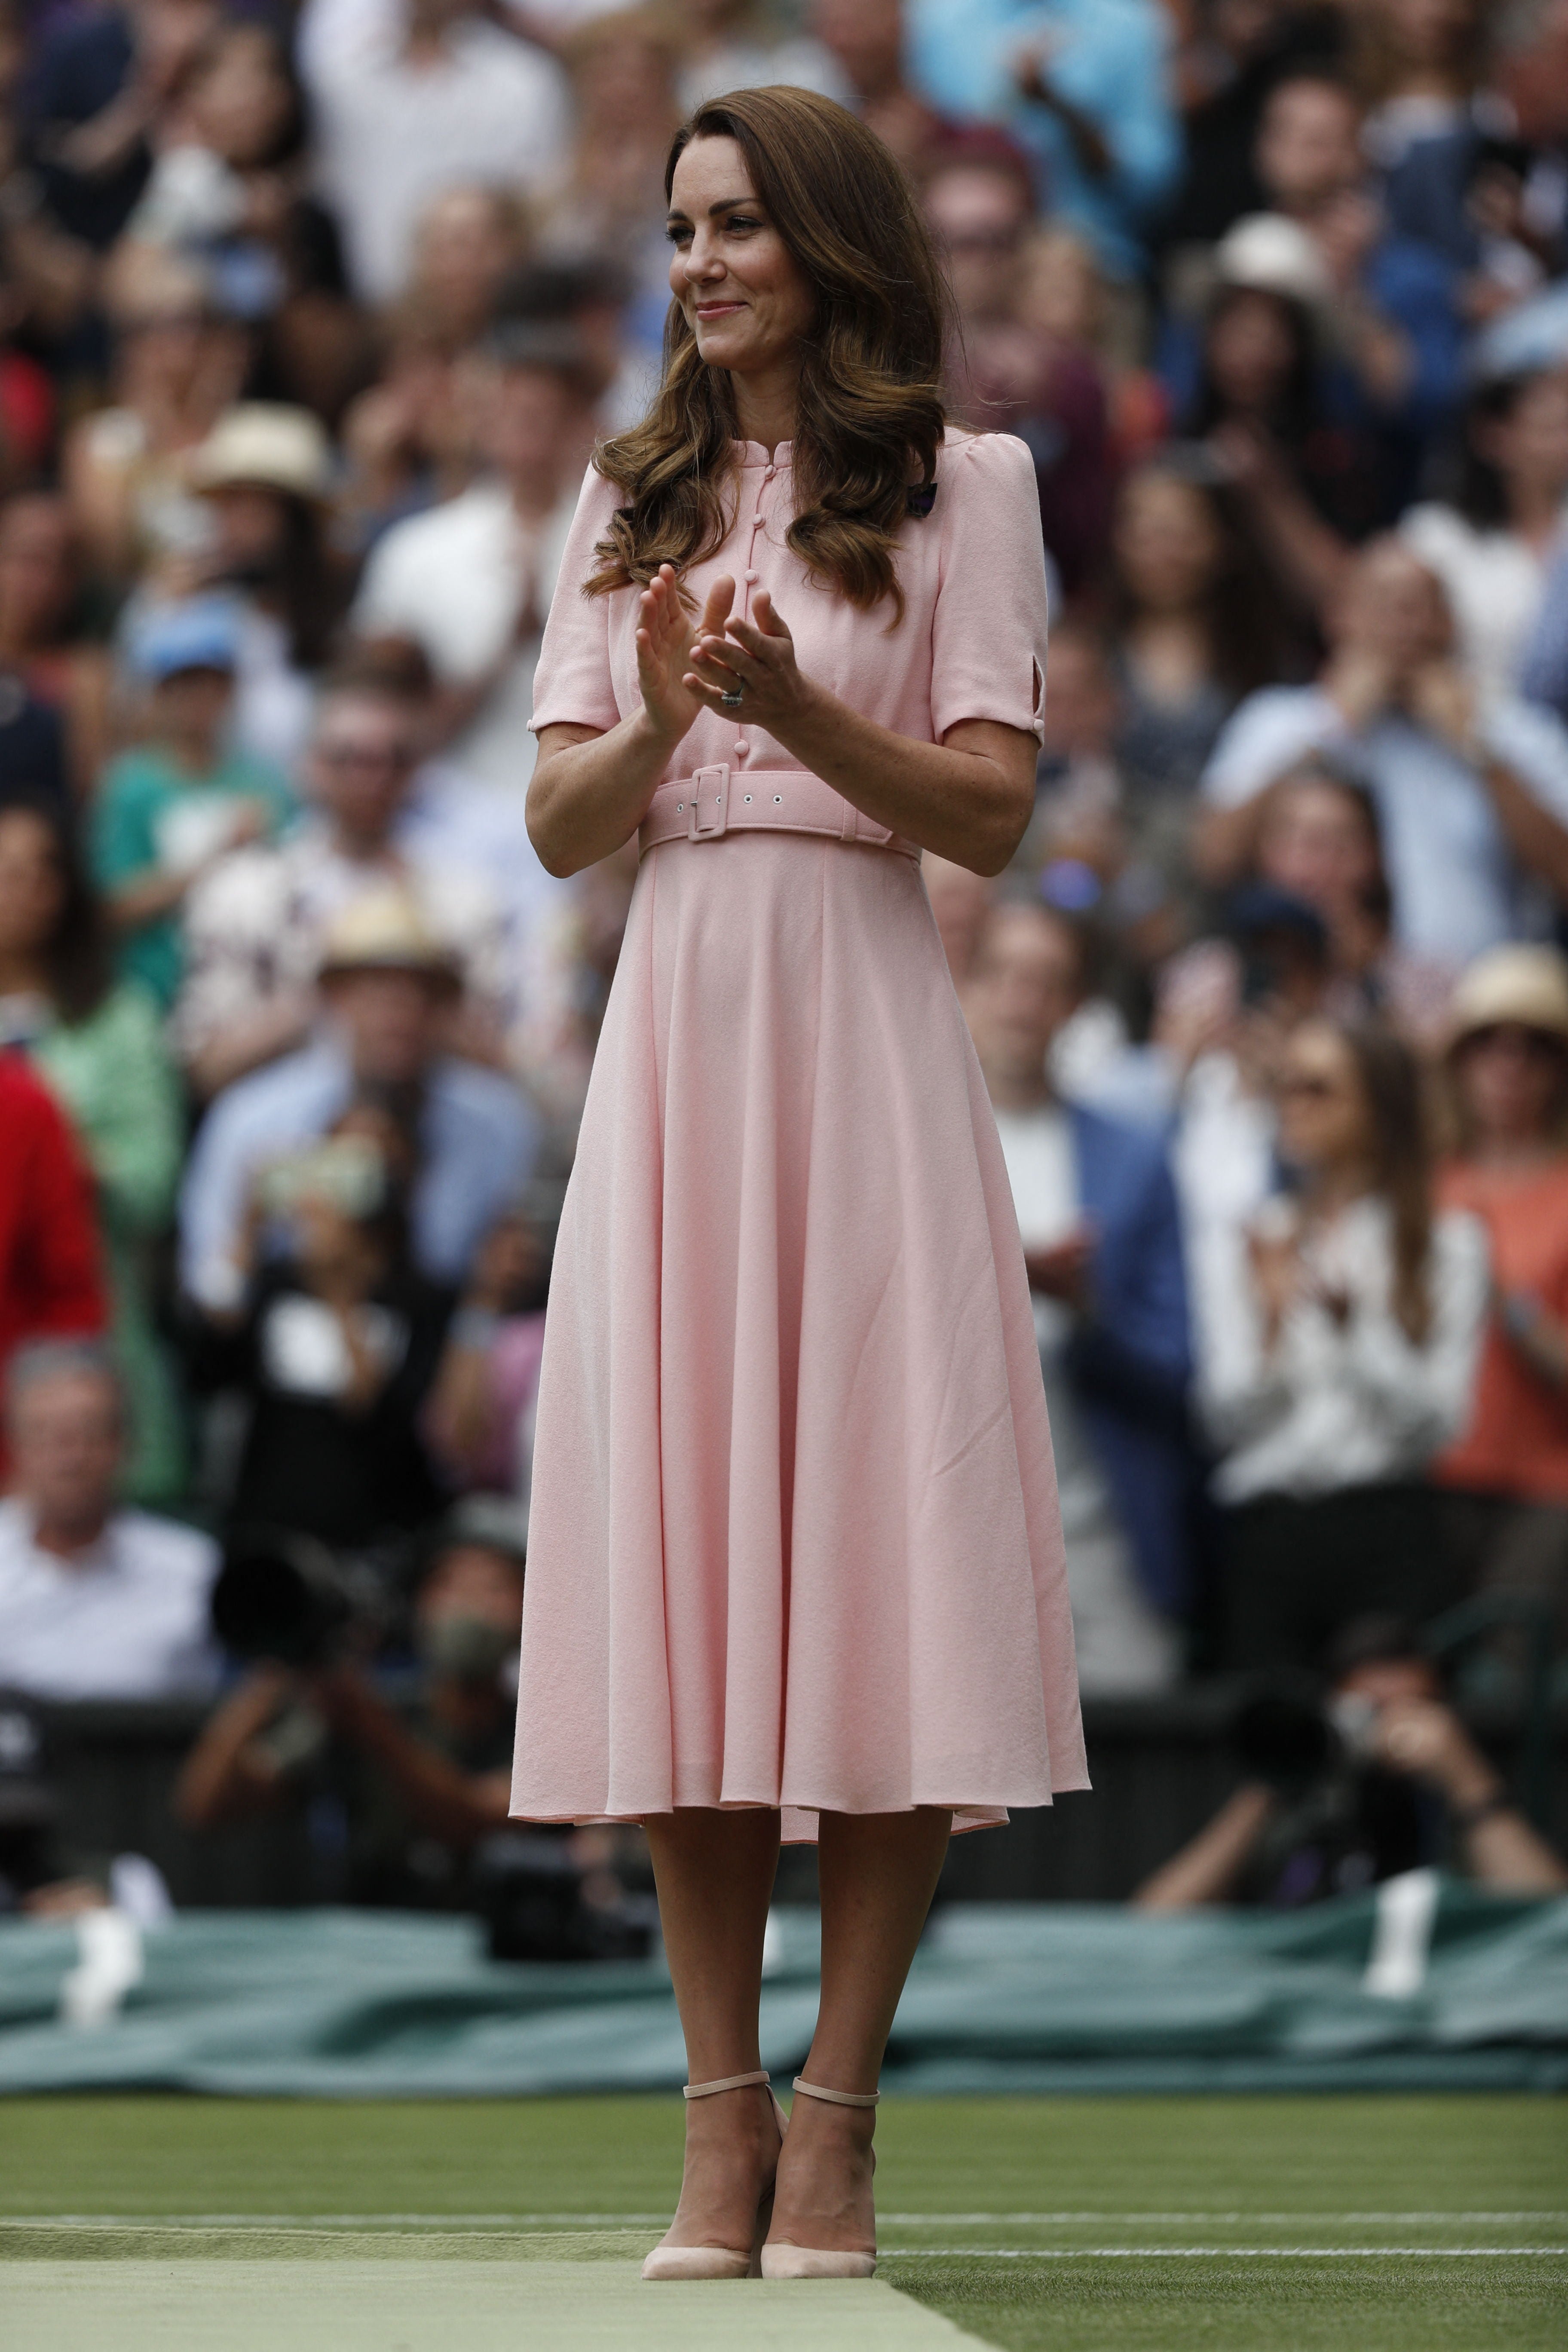 Kate wore an all pastel pink look